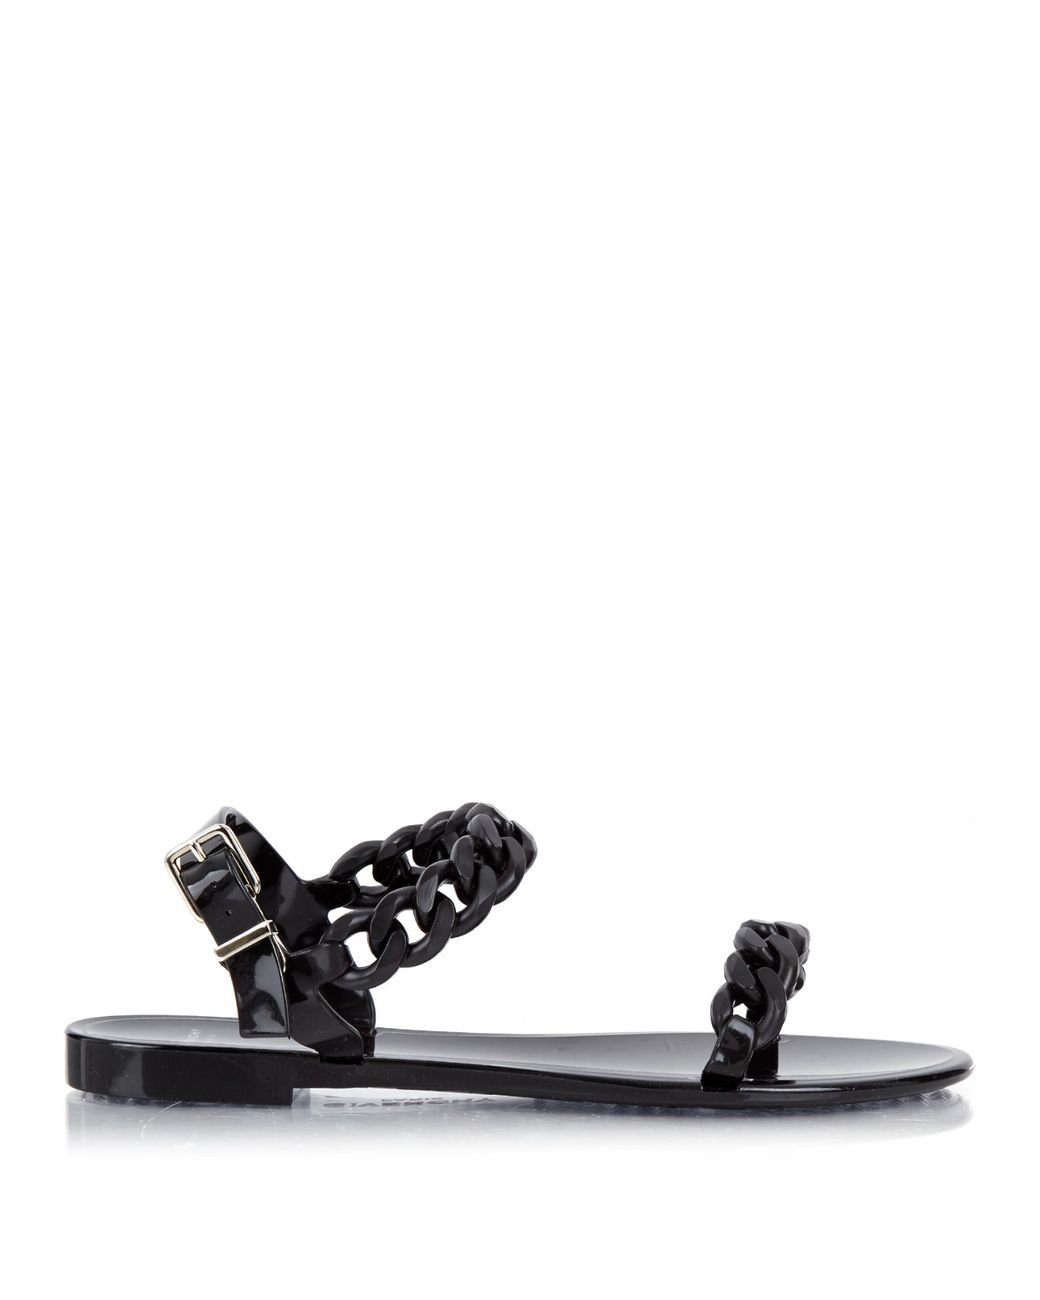 Givenchy Chain Rubber Sandals in Black | Lyst